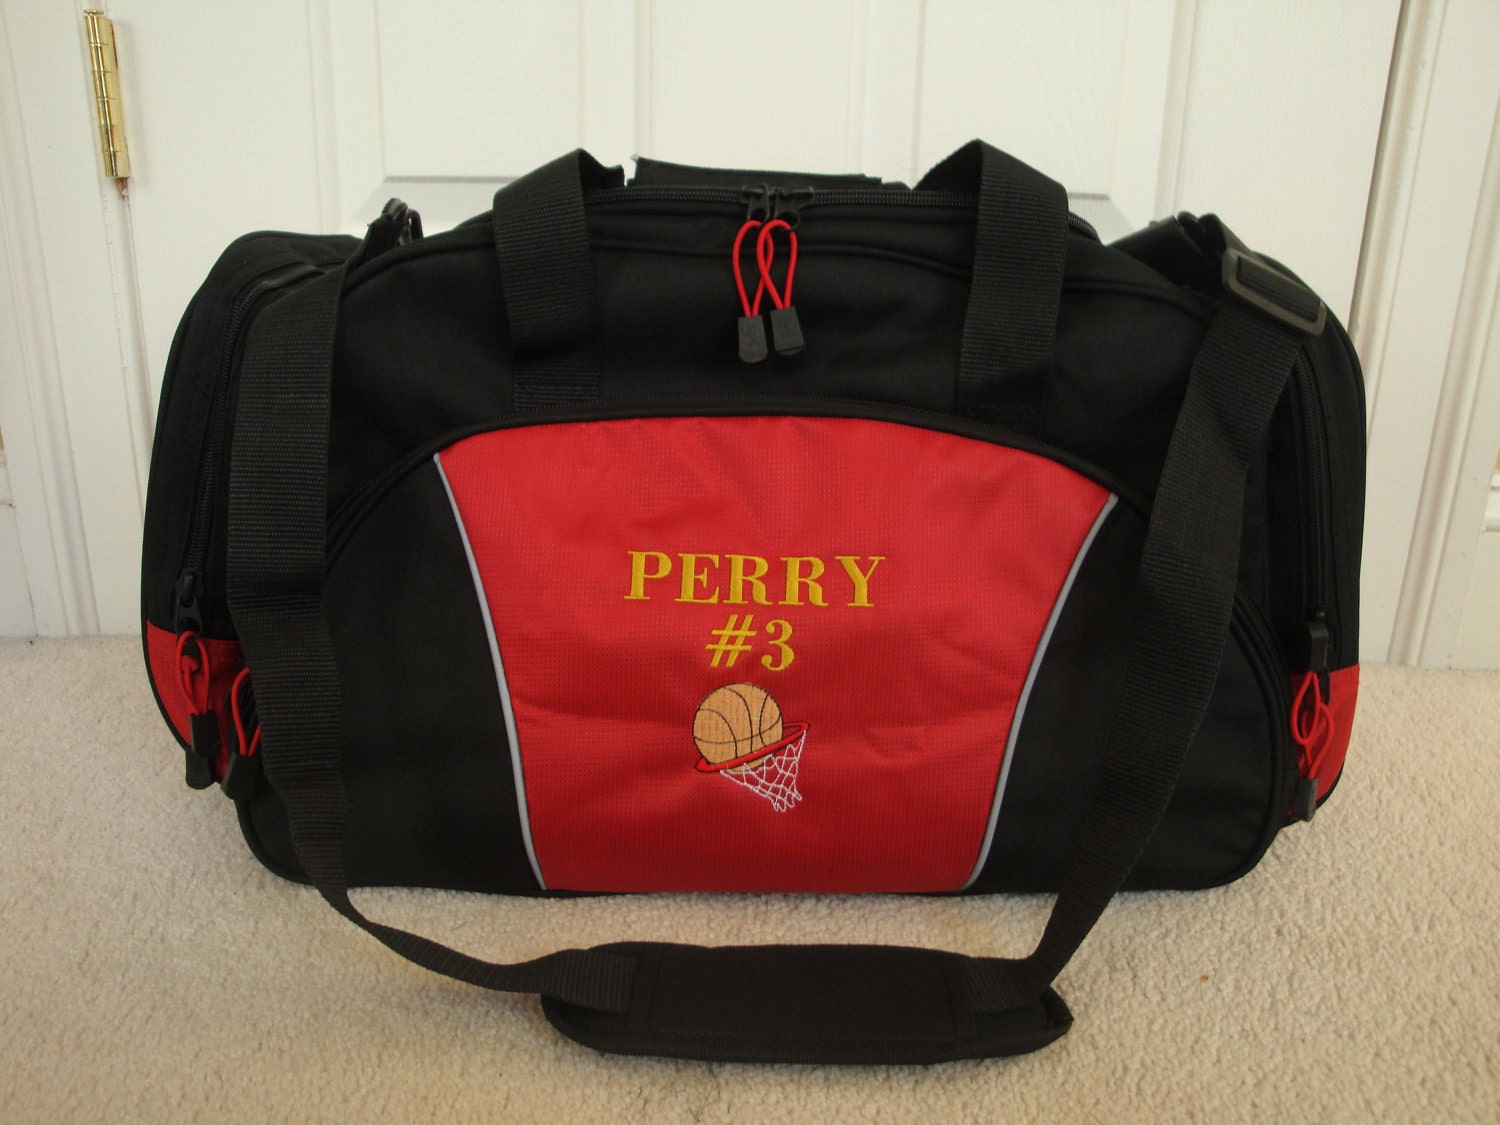 Duffel Bag Personalized Basketball Team Sports by HTsCreations